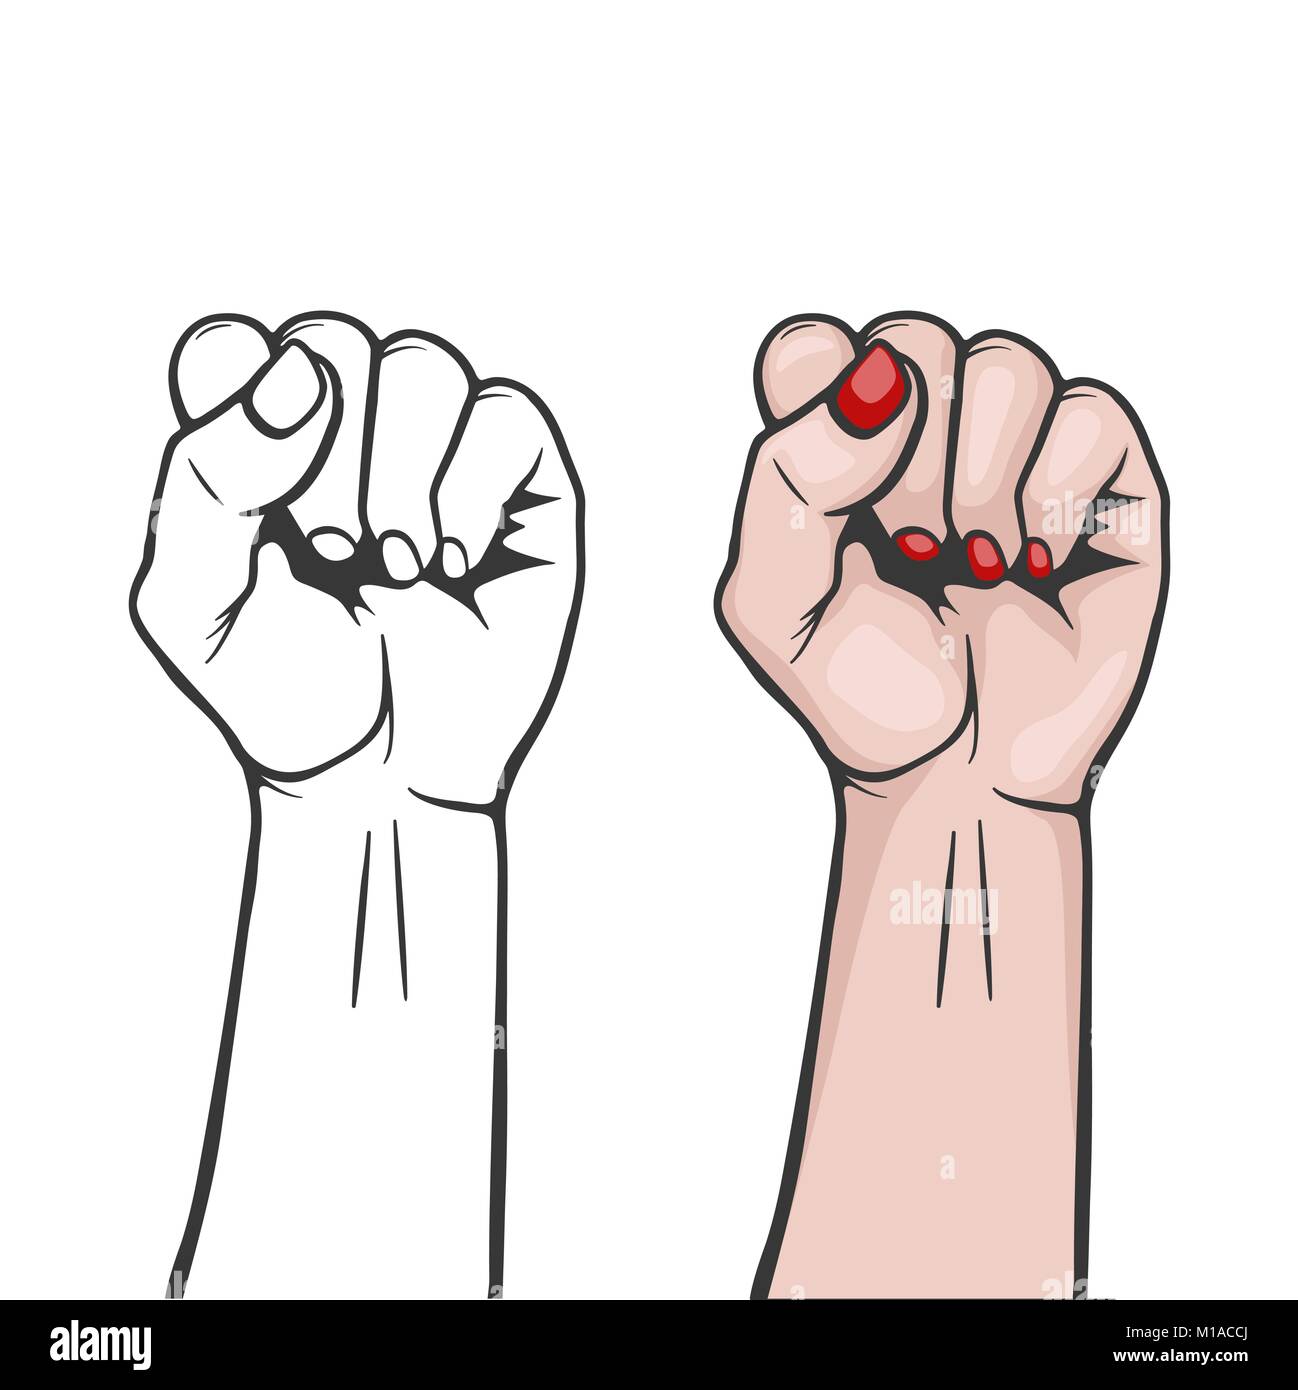 Raised women s fist isolated - symbol unity or solidarity, with oppressed people and women s rights. Feminism, protest, rebel, revolution or strike sign. Template for art posters, backgrounds etc Stock Vector